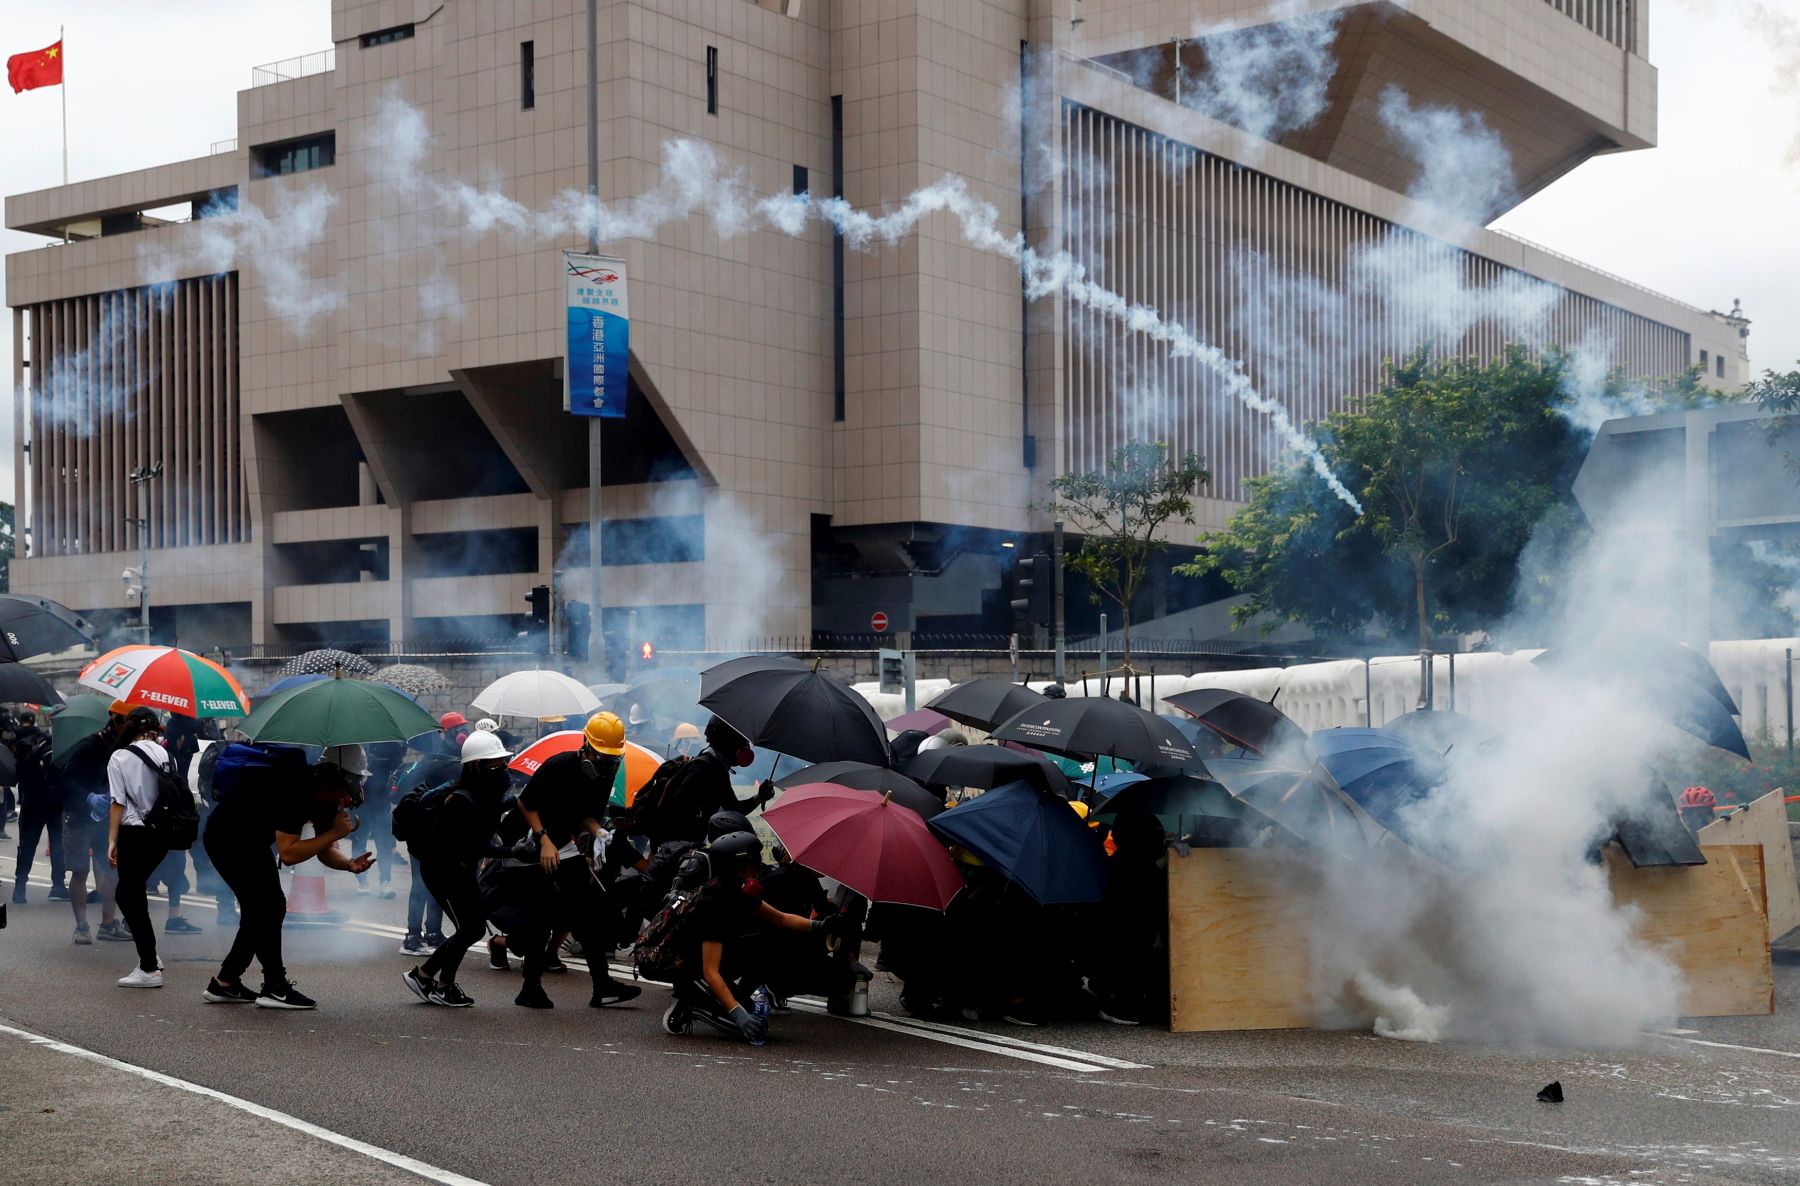 Demonstrators take cover as police fires tear gas during a protest in Hong Kong